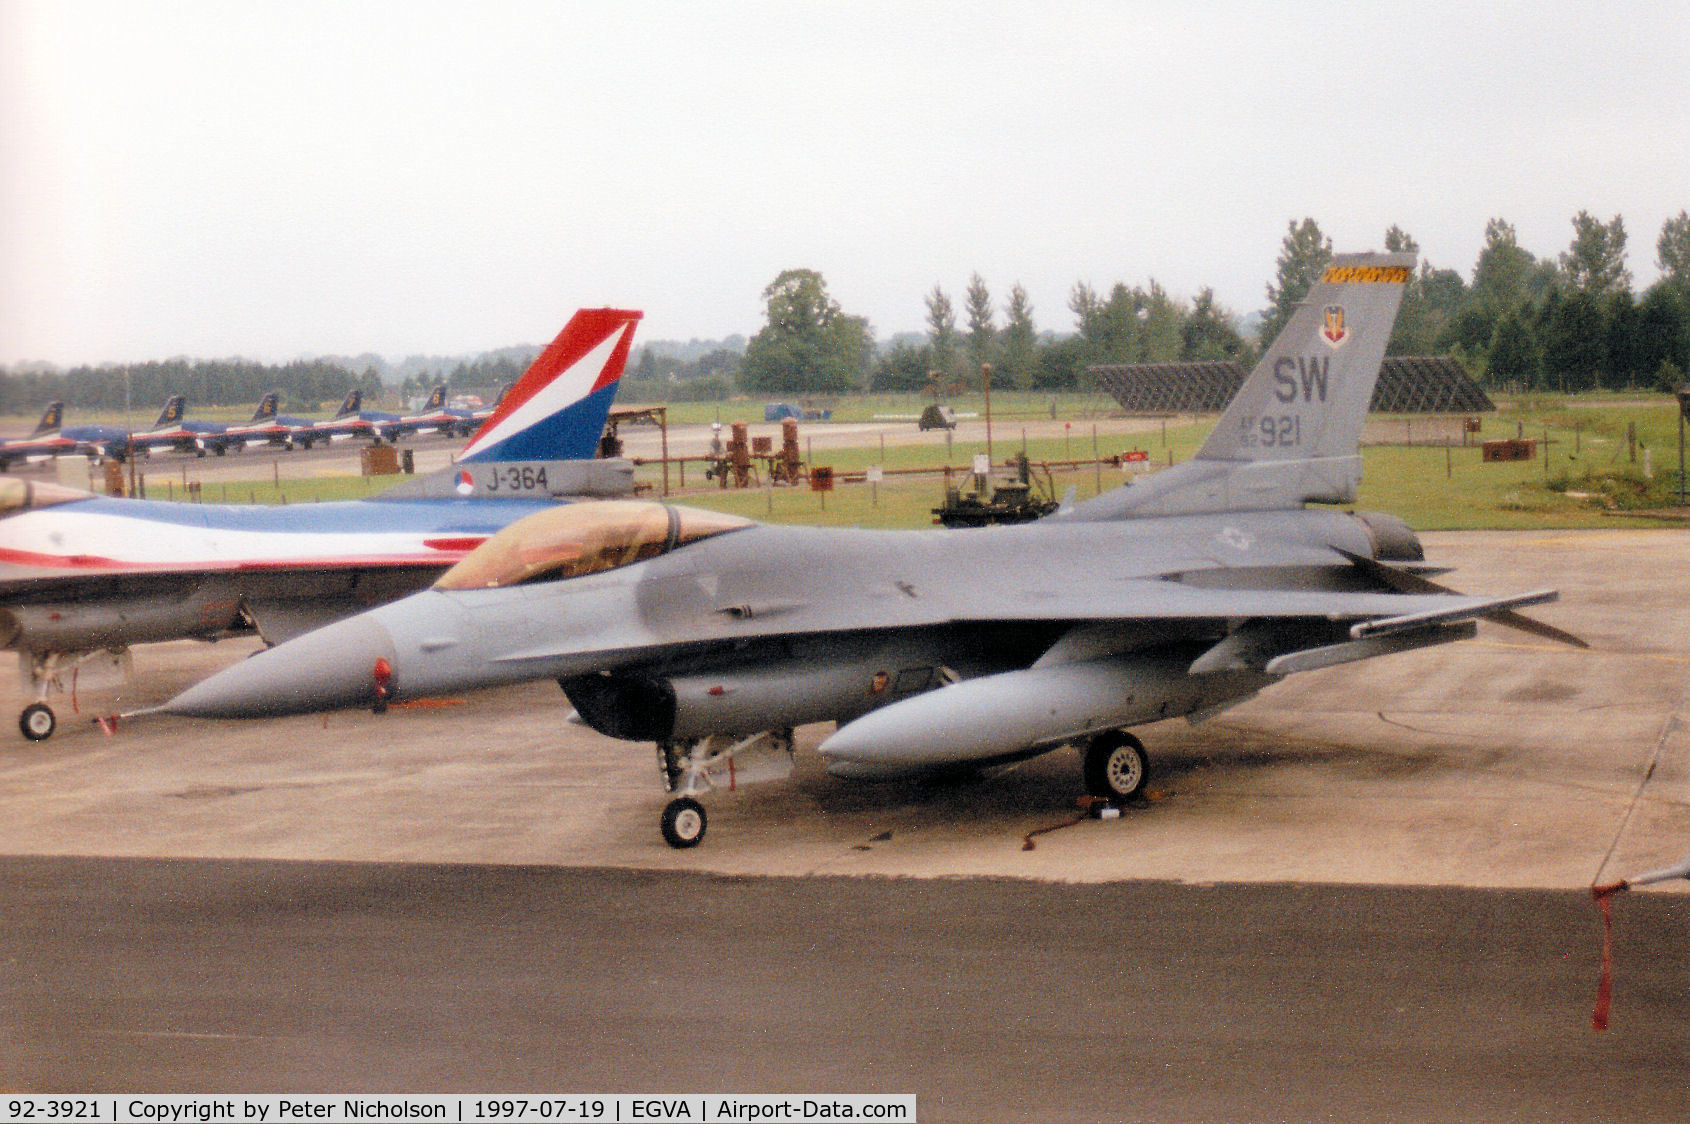 92-3921, 1992 Lockheed F-16C Fighting Falcon C/N CC-163, F-16CJ Falcon, callsign Trend 63, of 79th Fighter Squadron/20th Fighter Wing at Shaw AFB on the flight-line at the 1997 Intnl Air Tattoo at RAF Fairford.